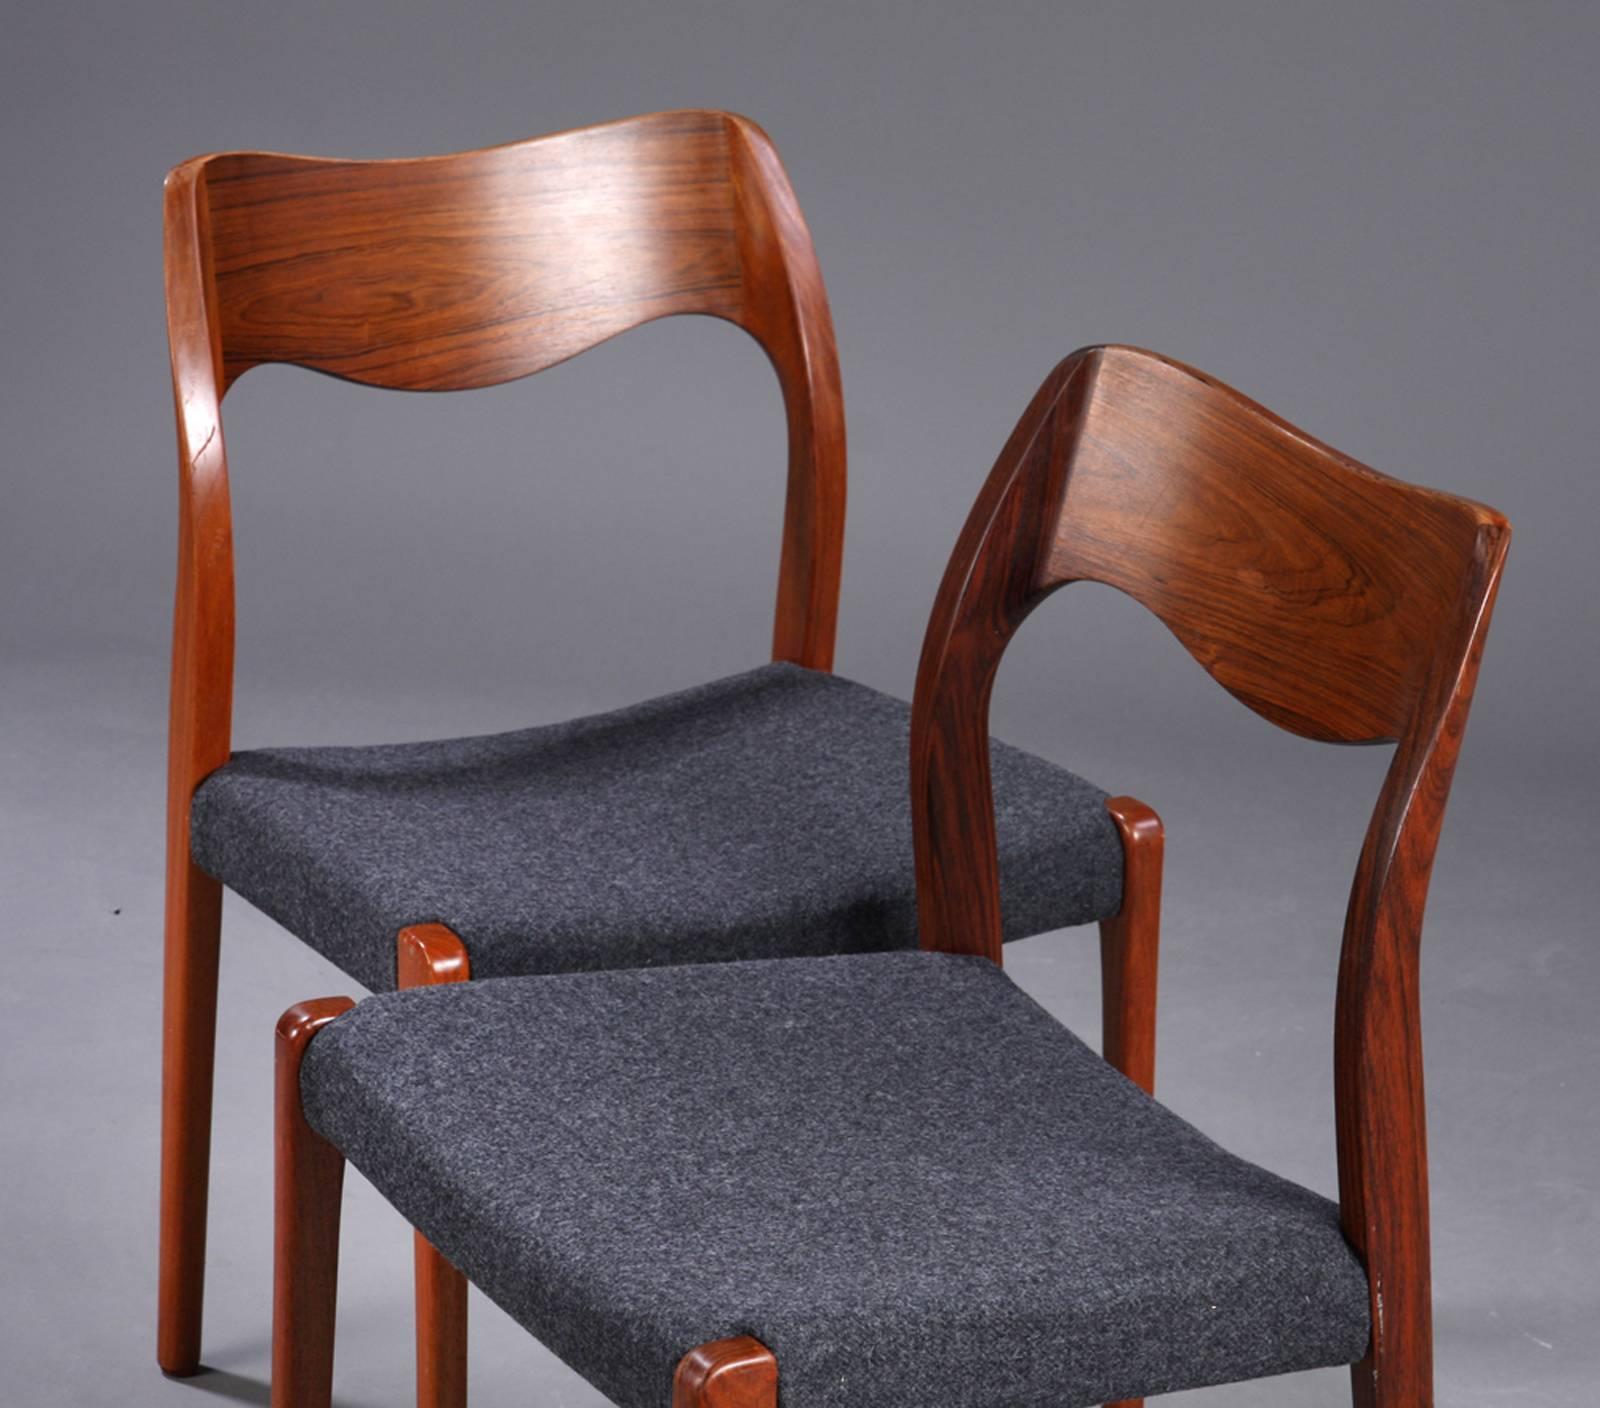 Dining chairs designed 1951 by Niels Otto Møller and produced by J. L. Møller Møbelfabrik, model number 71.
Original condition.